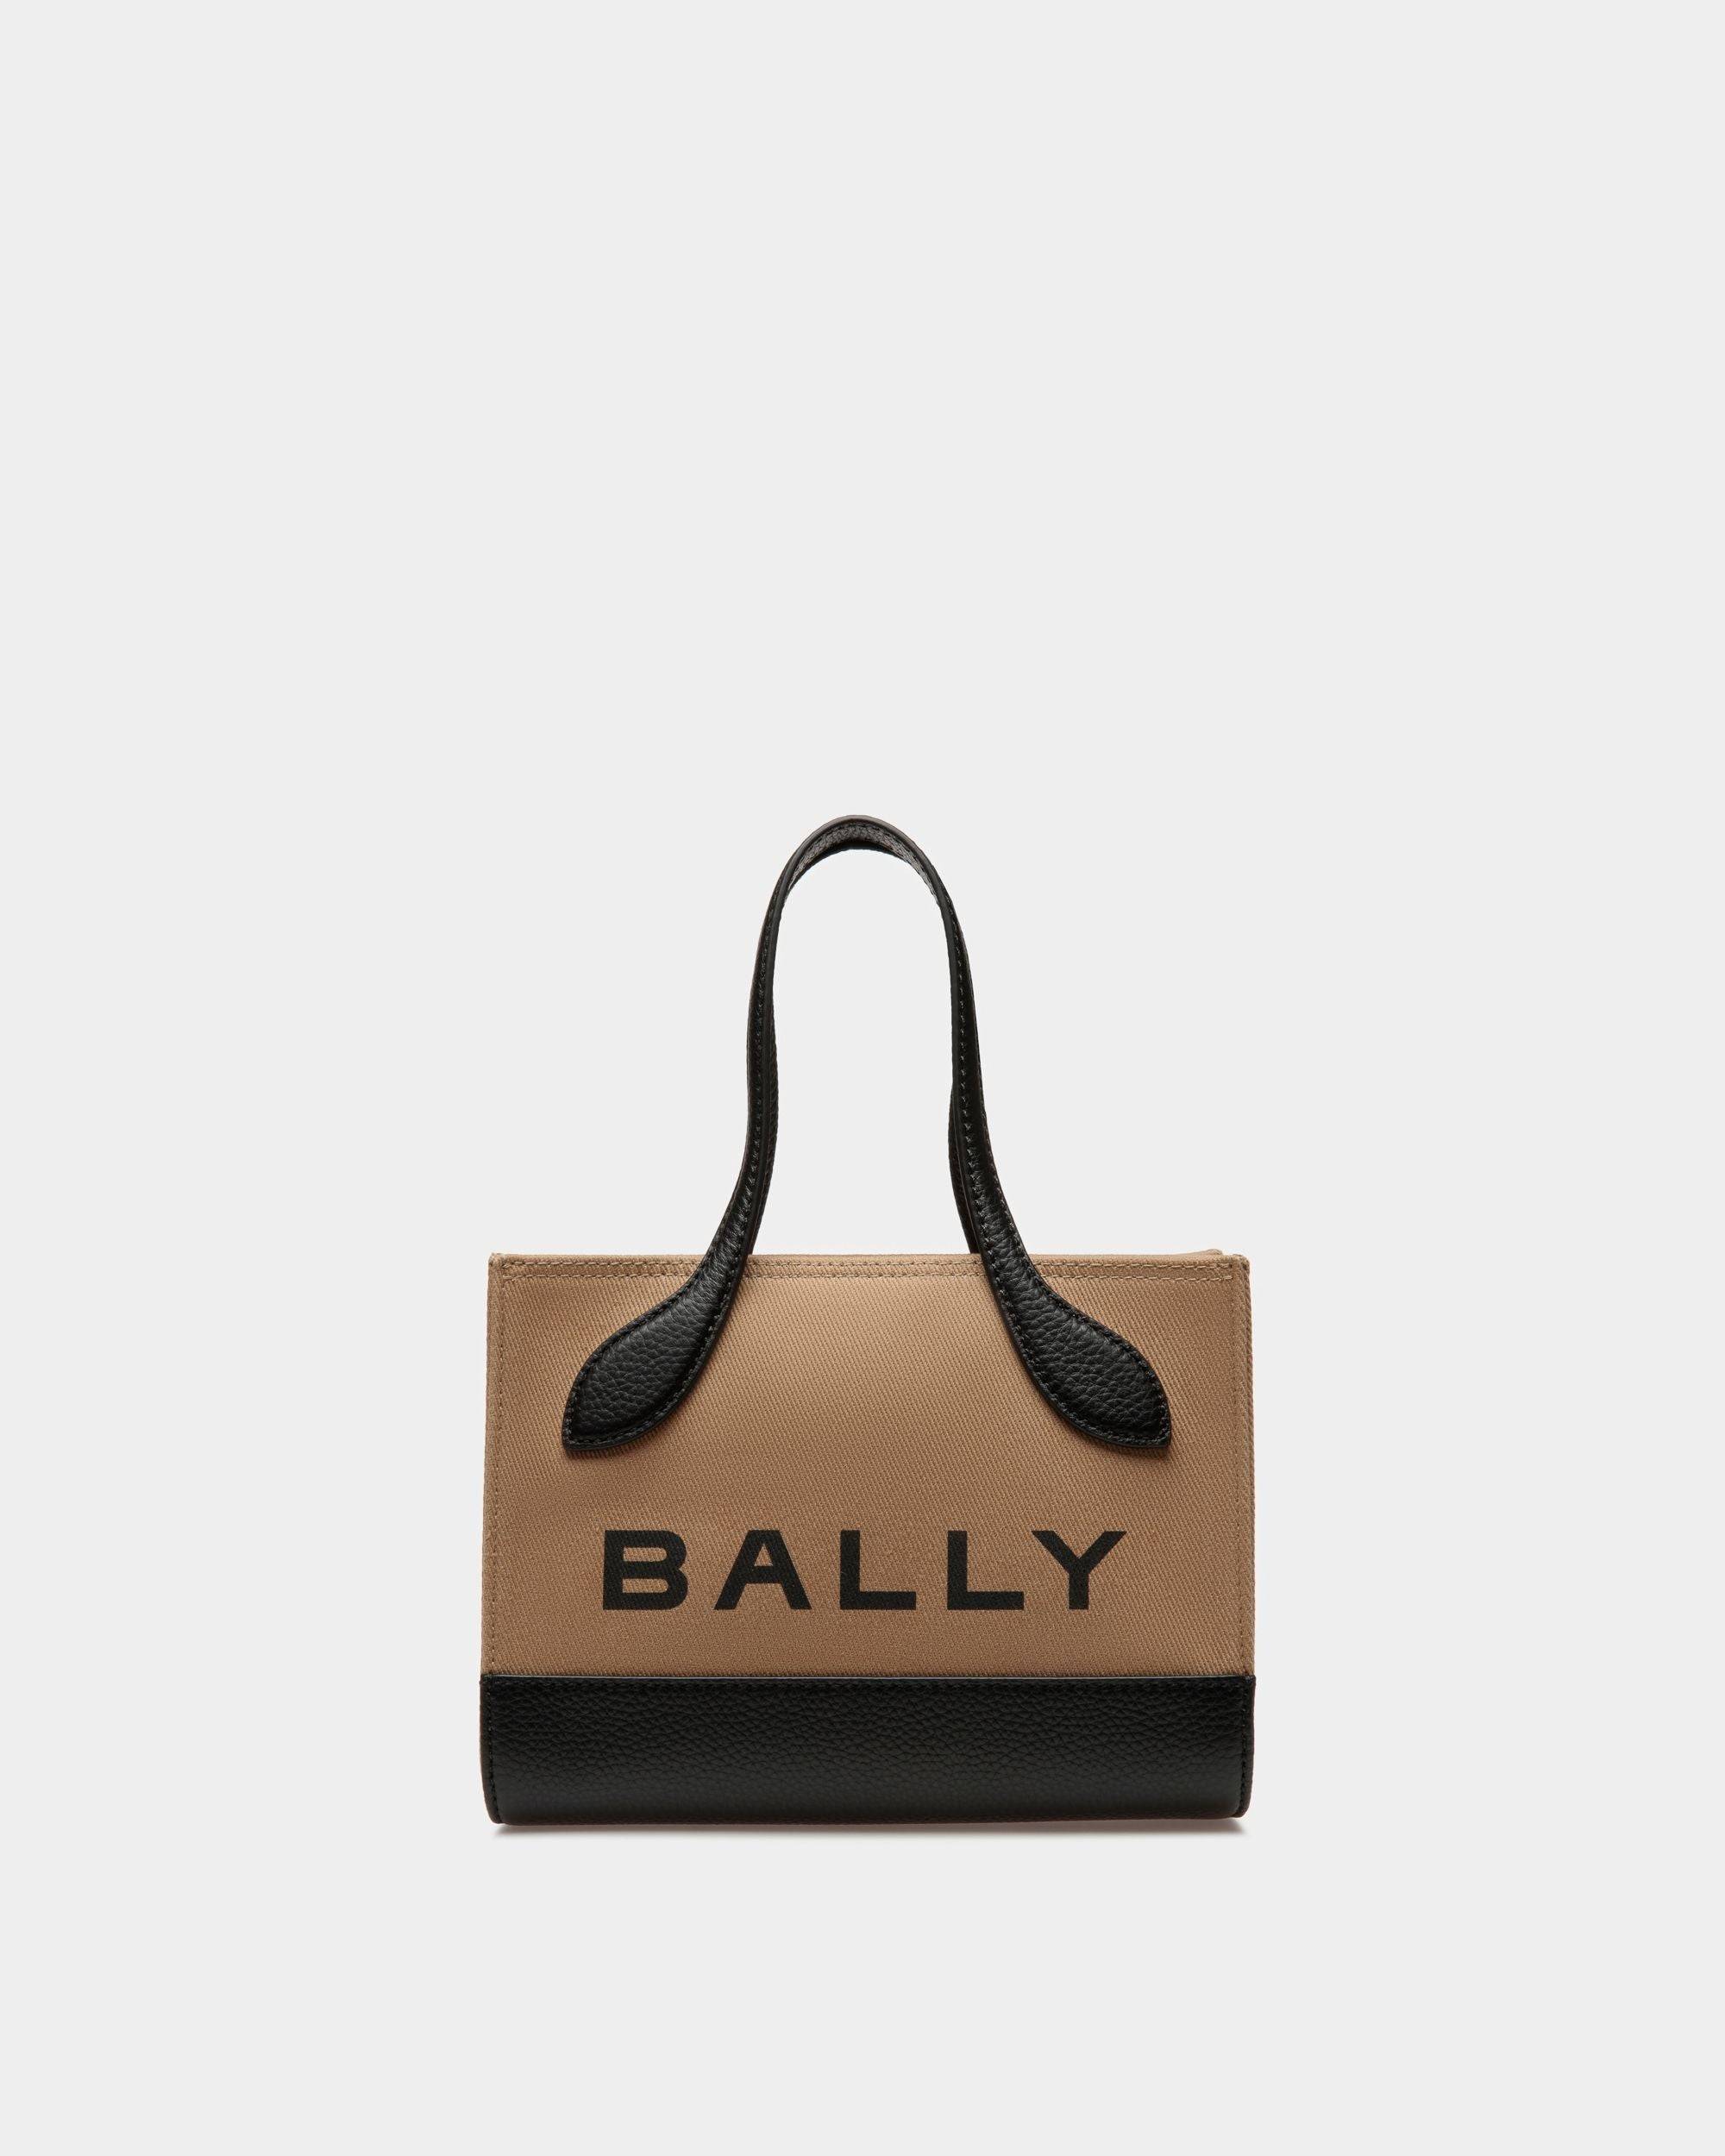 Women's Bar Minibag In Sand And Black Fabric | Bally | Still Life Front